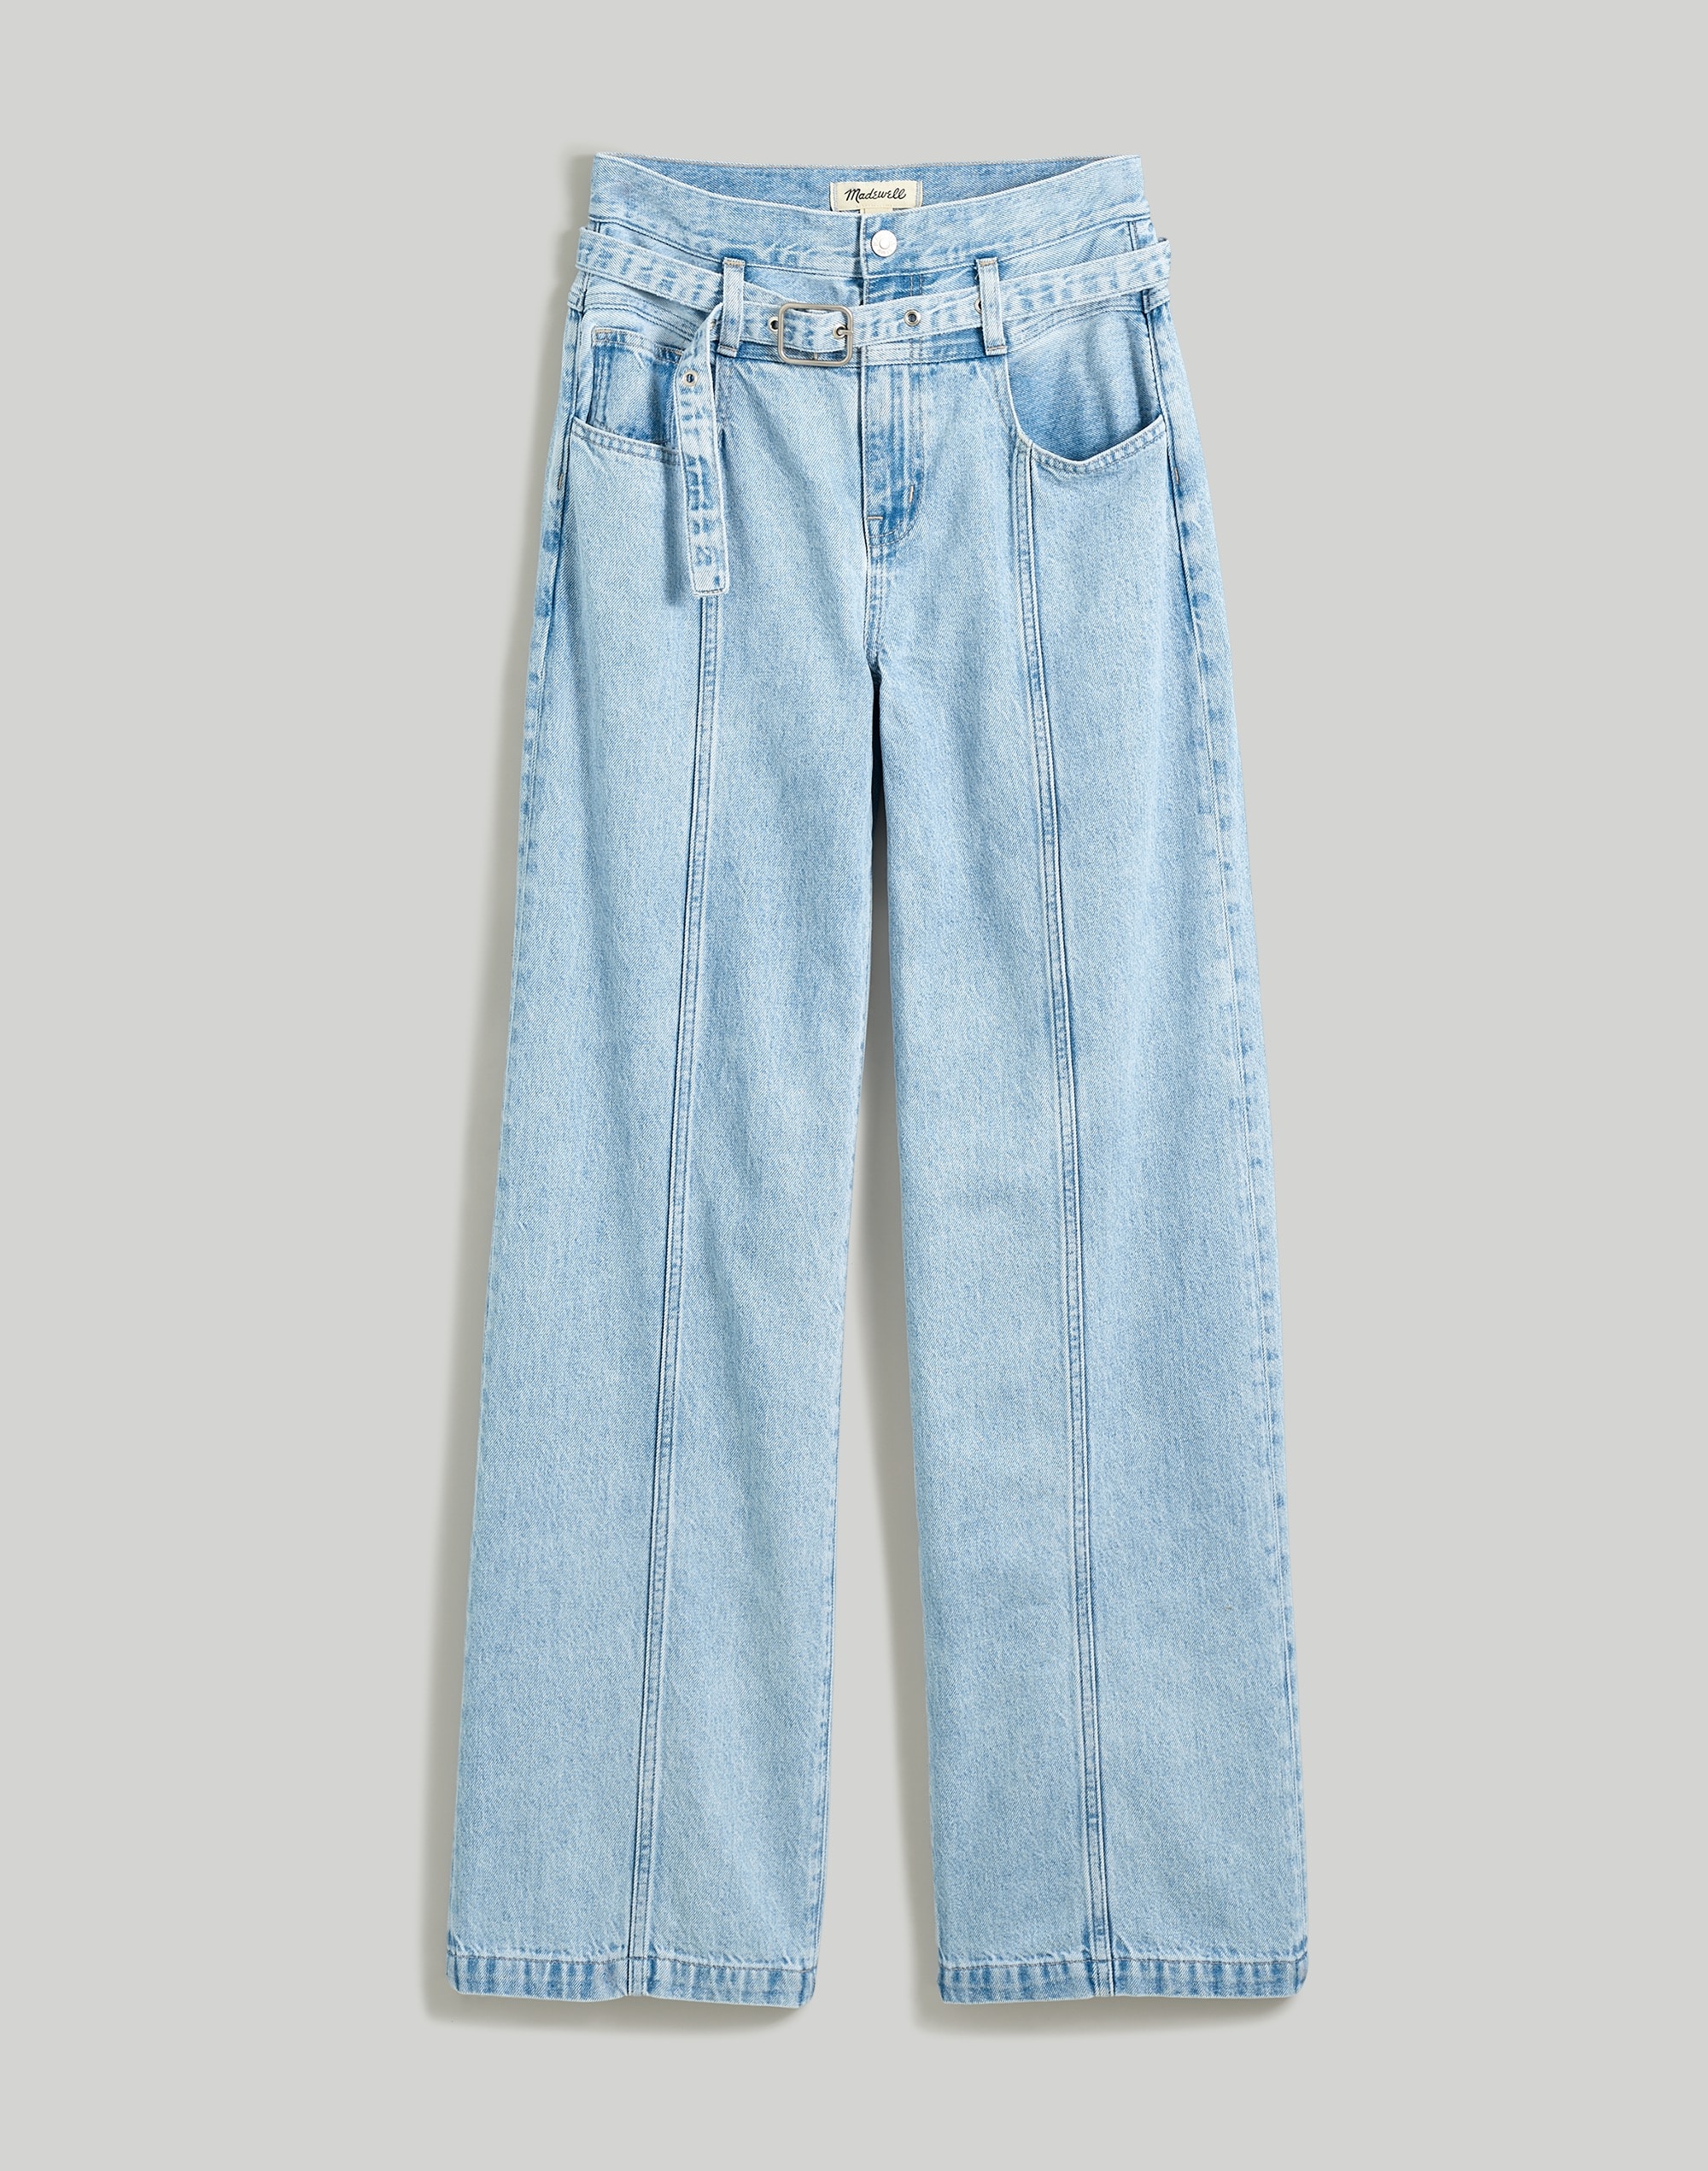 Belted Baggy Jeans in Kirkham Wash